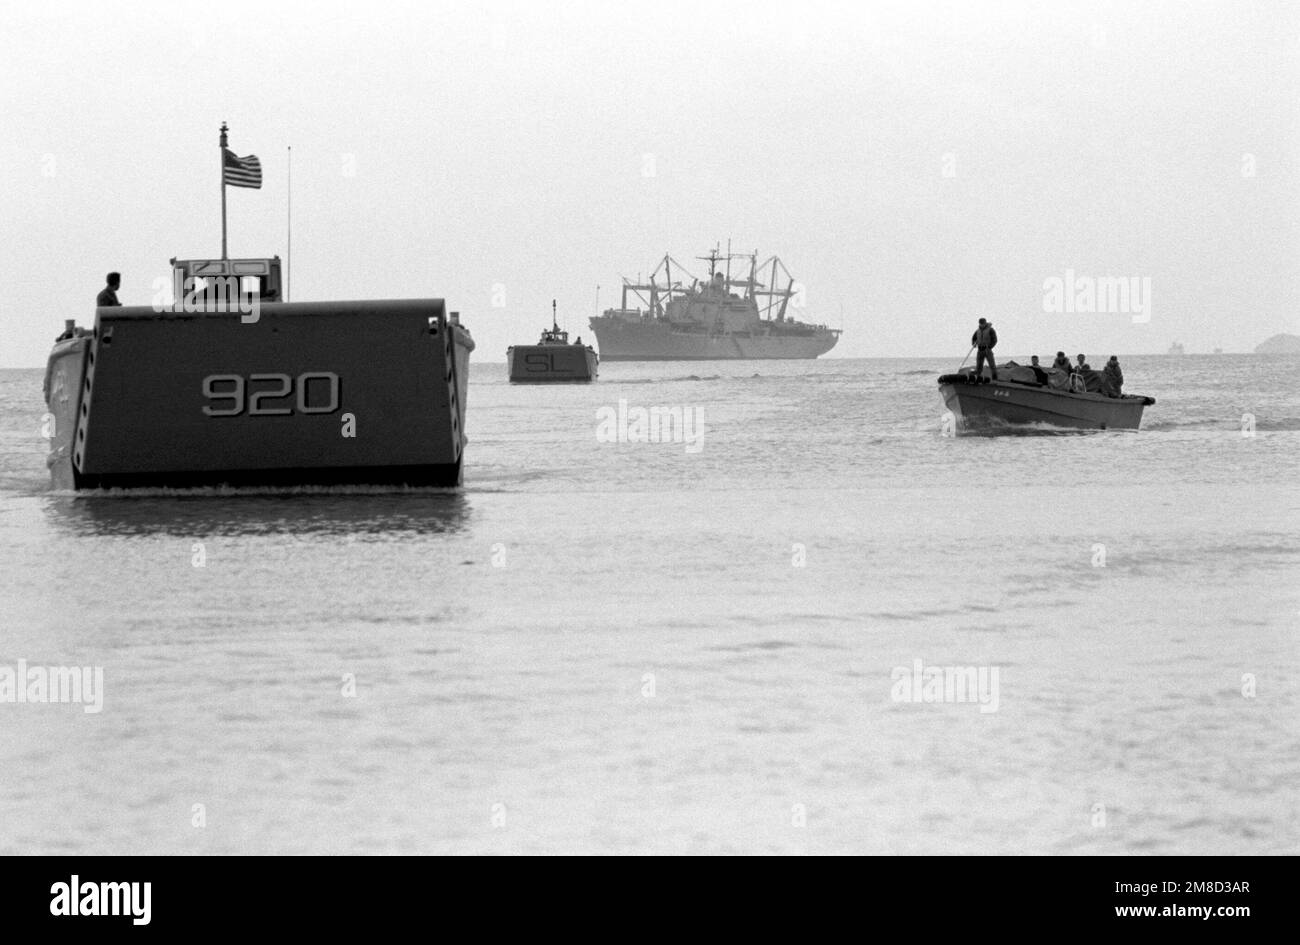 Two LCM-8 mechanized landing craft head for shore to pick up Marine Corps vehicles and equipment that will be loaded aboard amphibious ships and transported to South Korea for use in the combined South Korean/U.S. exercise Team Spirit '90. The amphibious cargo ship USS ST. LOUIS (LKA-116) is in the background. Subject Operation/Series: TEAM SPIRIT '90 State: Okinawa Country: Japan (JPN) Stock Photo